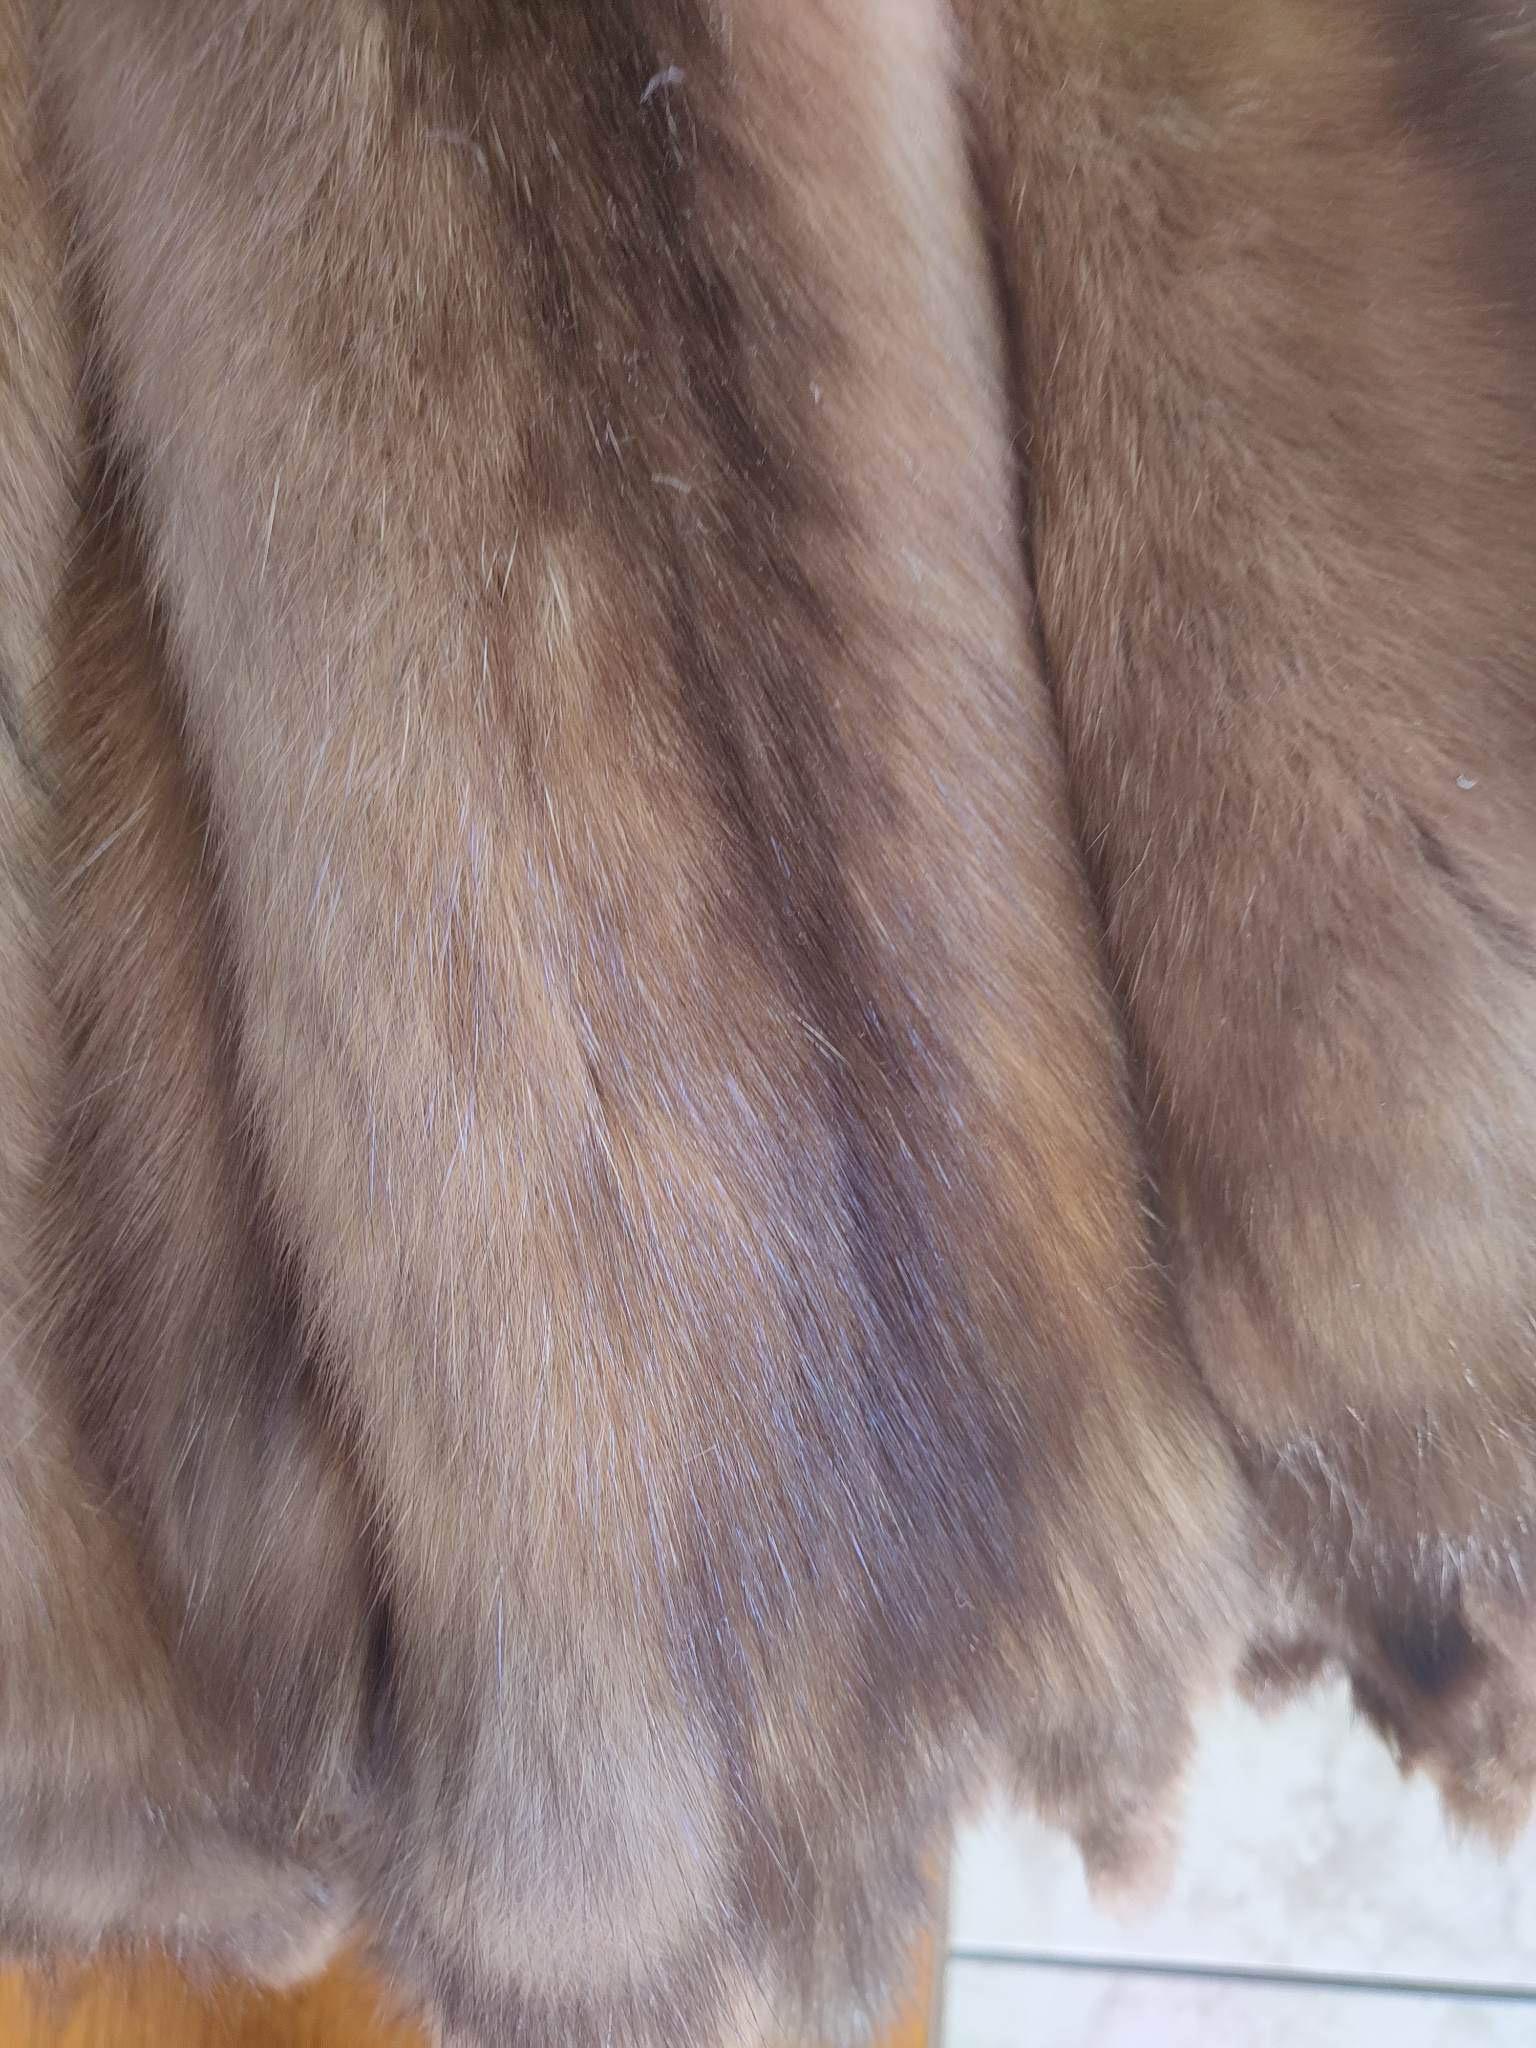 Brand Russian new sable fur coat size M For Sale 1